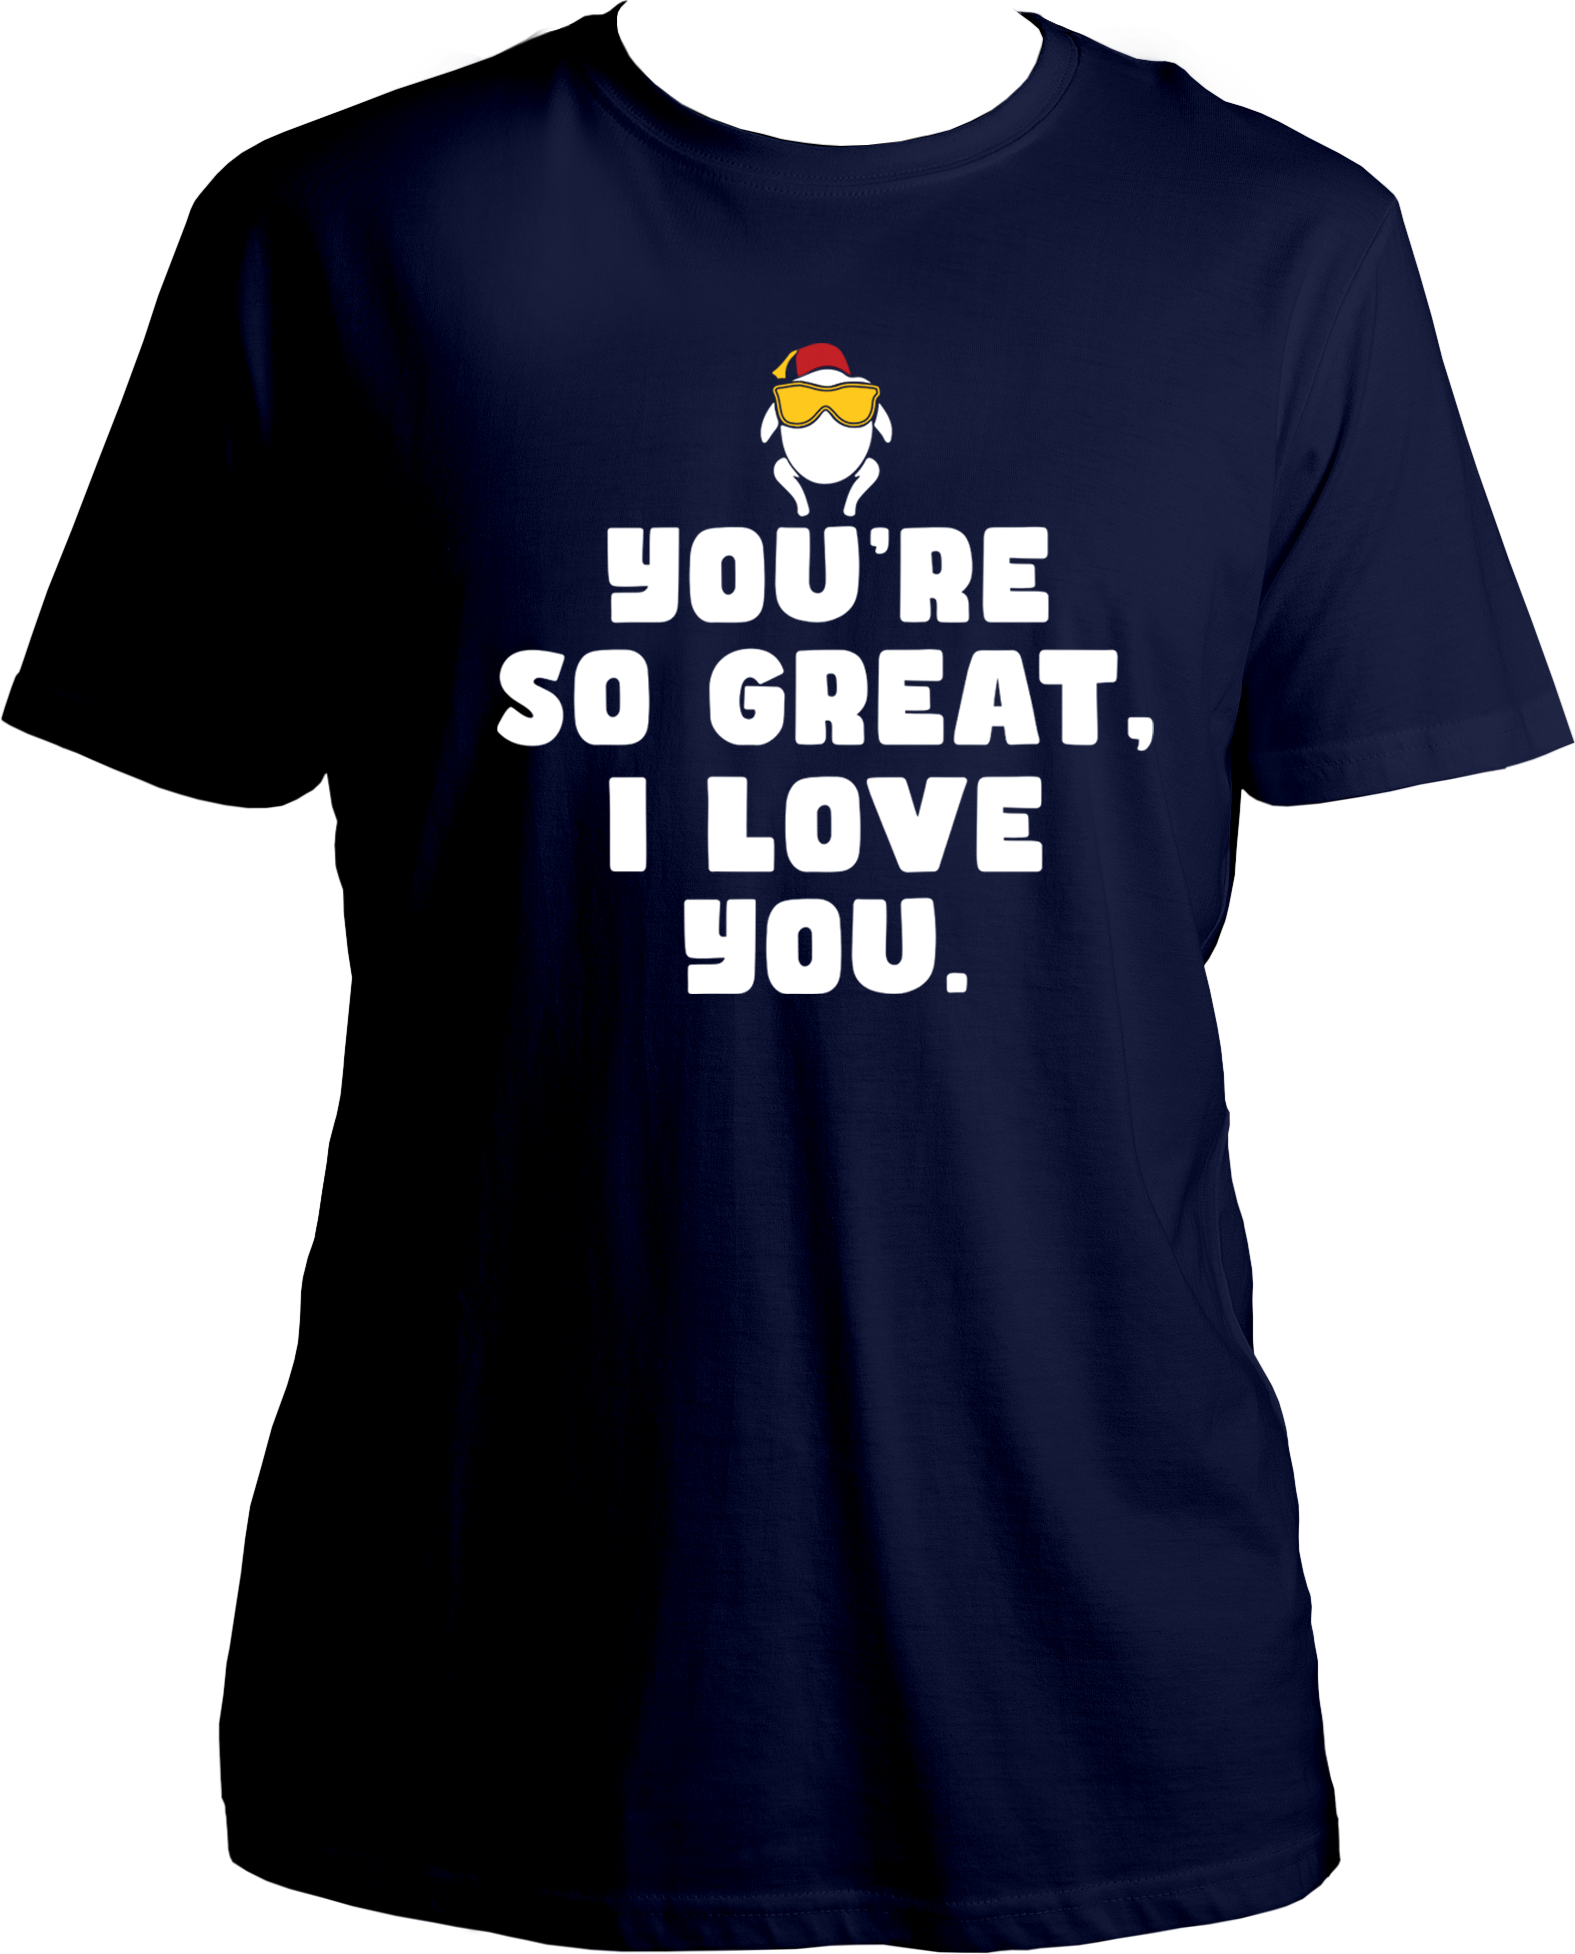 Welcome to our exclusive collection of F.R.I.E.N.D.S-inspired round neck cotton t-shirts! Dive into nostalgia and relive the iconic moment when Chandler Bing first confessed his love for Monica in the Thanksgiving episode with our special edition tee. The shirt features the heartwarming quote, "You're So Great, I Love You," capturing the essence of that memorable scene.